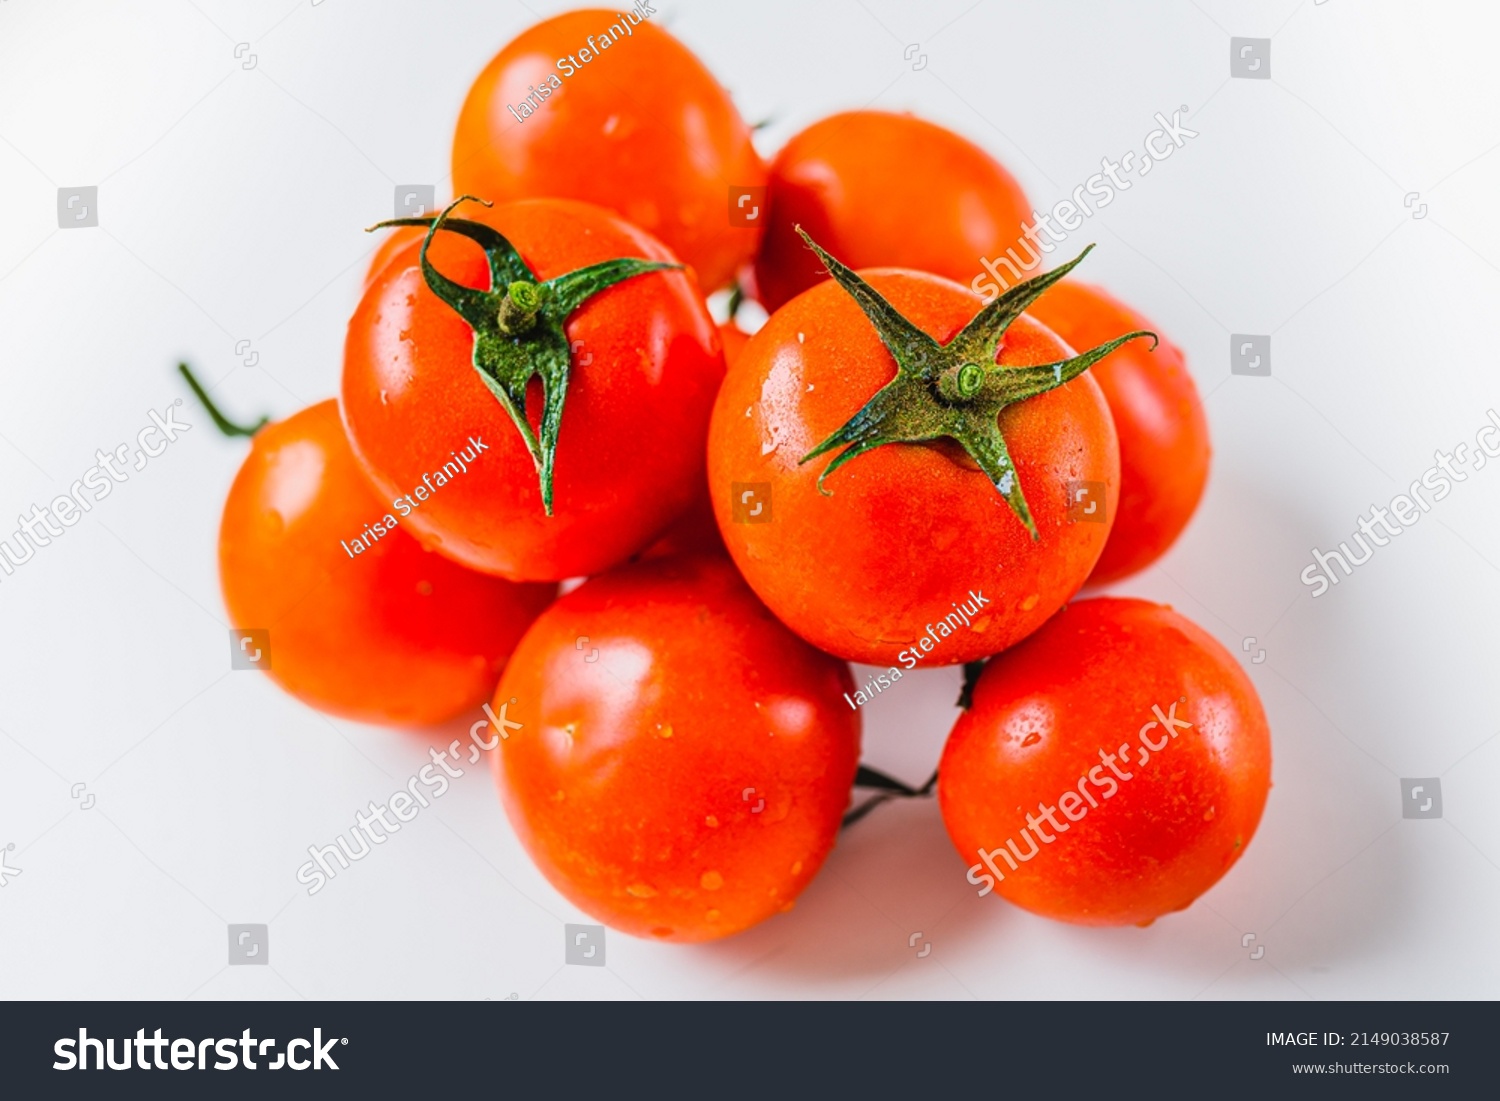 Bunch of ripe tomatoes with one source of natural light. Ripe tomatoes on vine. Ripe red tomatoes in water drops #2149038587